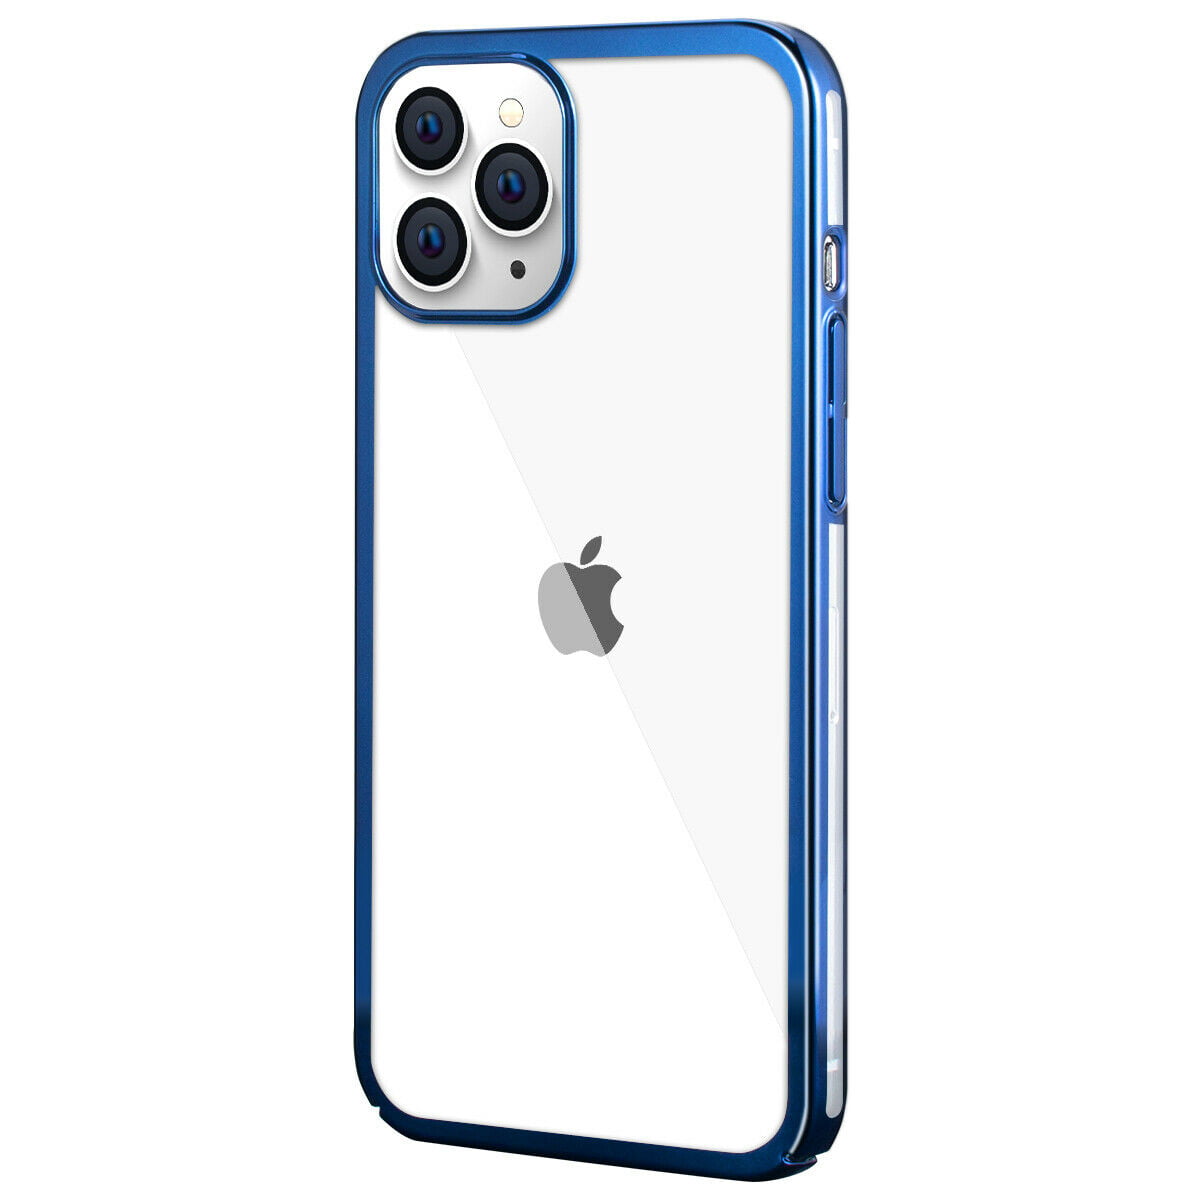 For Iphone 12 Pro Max Iphone 12 Pro Iphone 12 Max Slim Shockproof Case Ultra Thin Clear Hard Cover Walmart Com